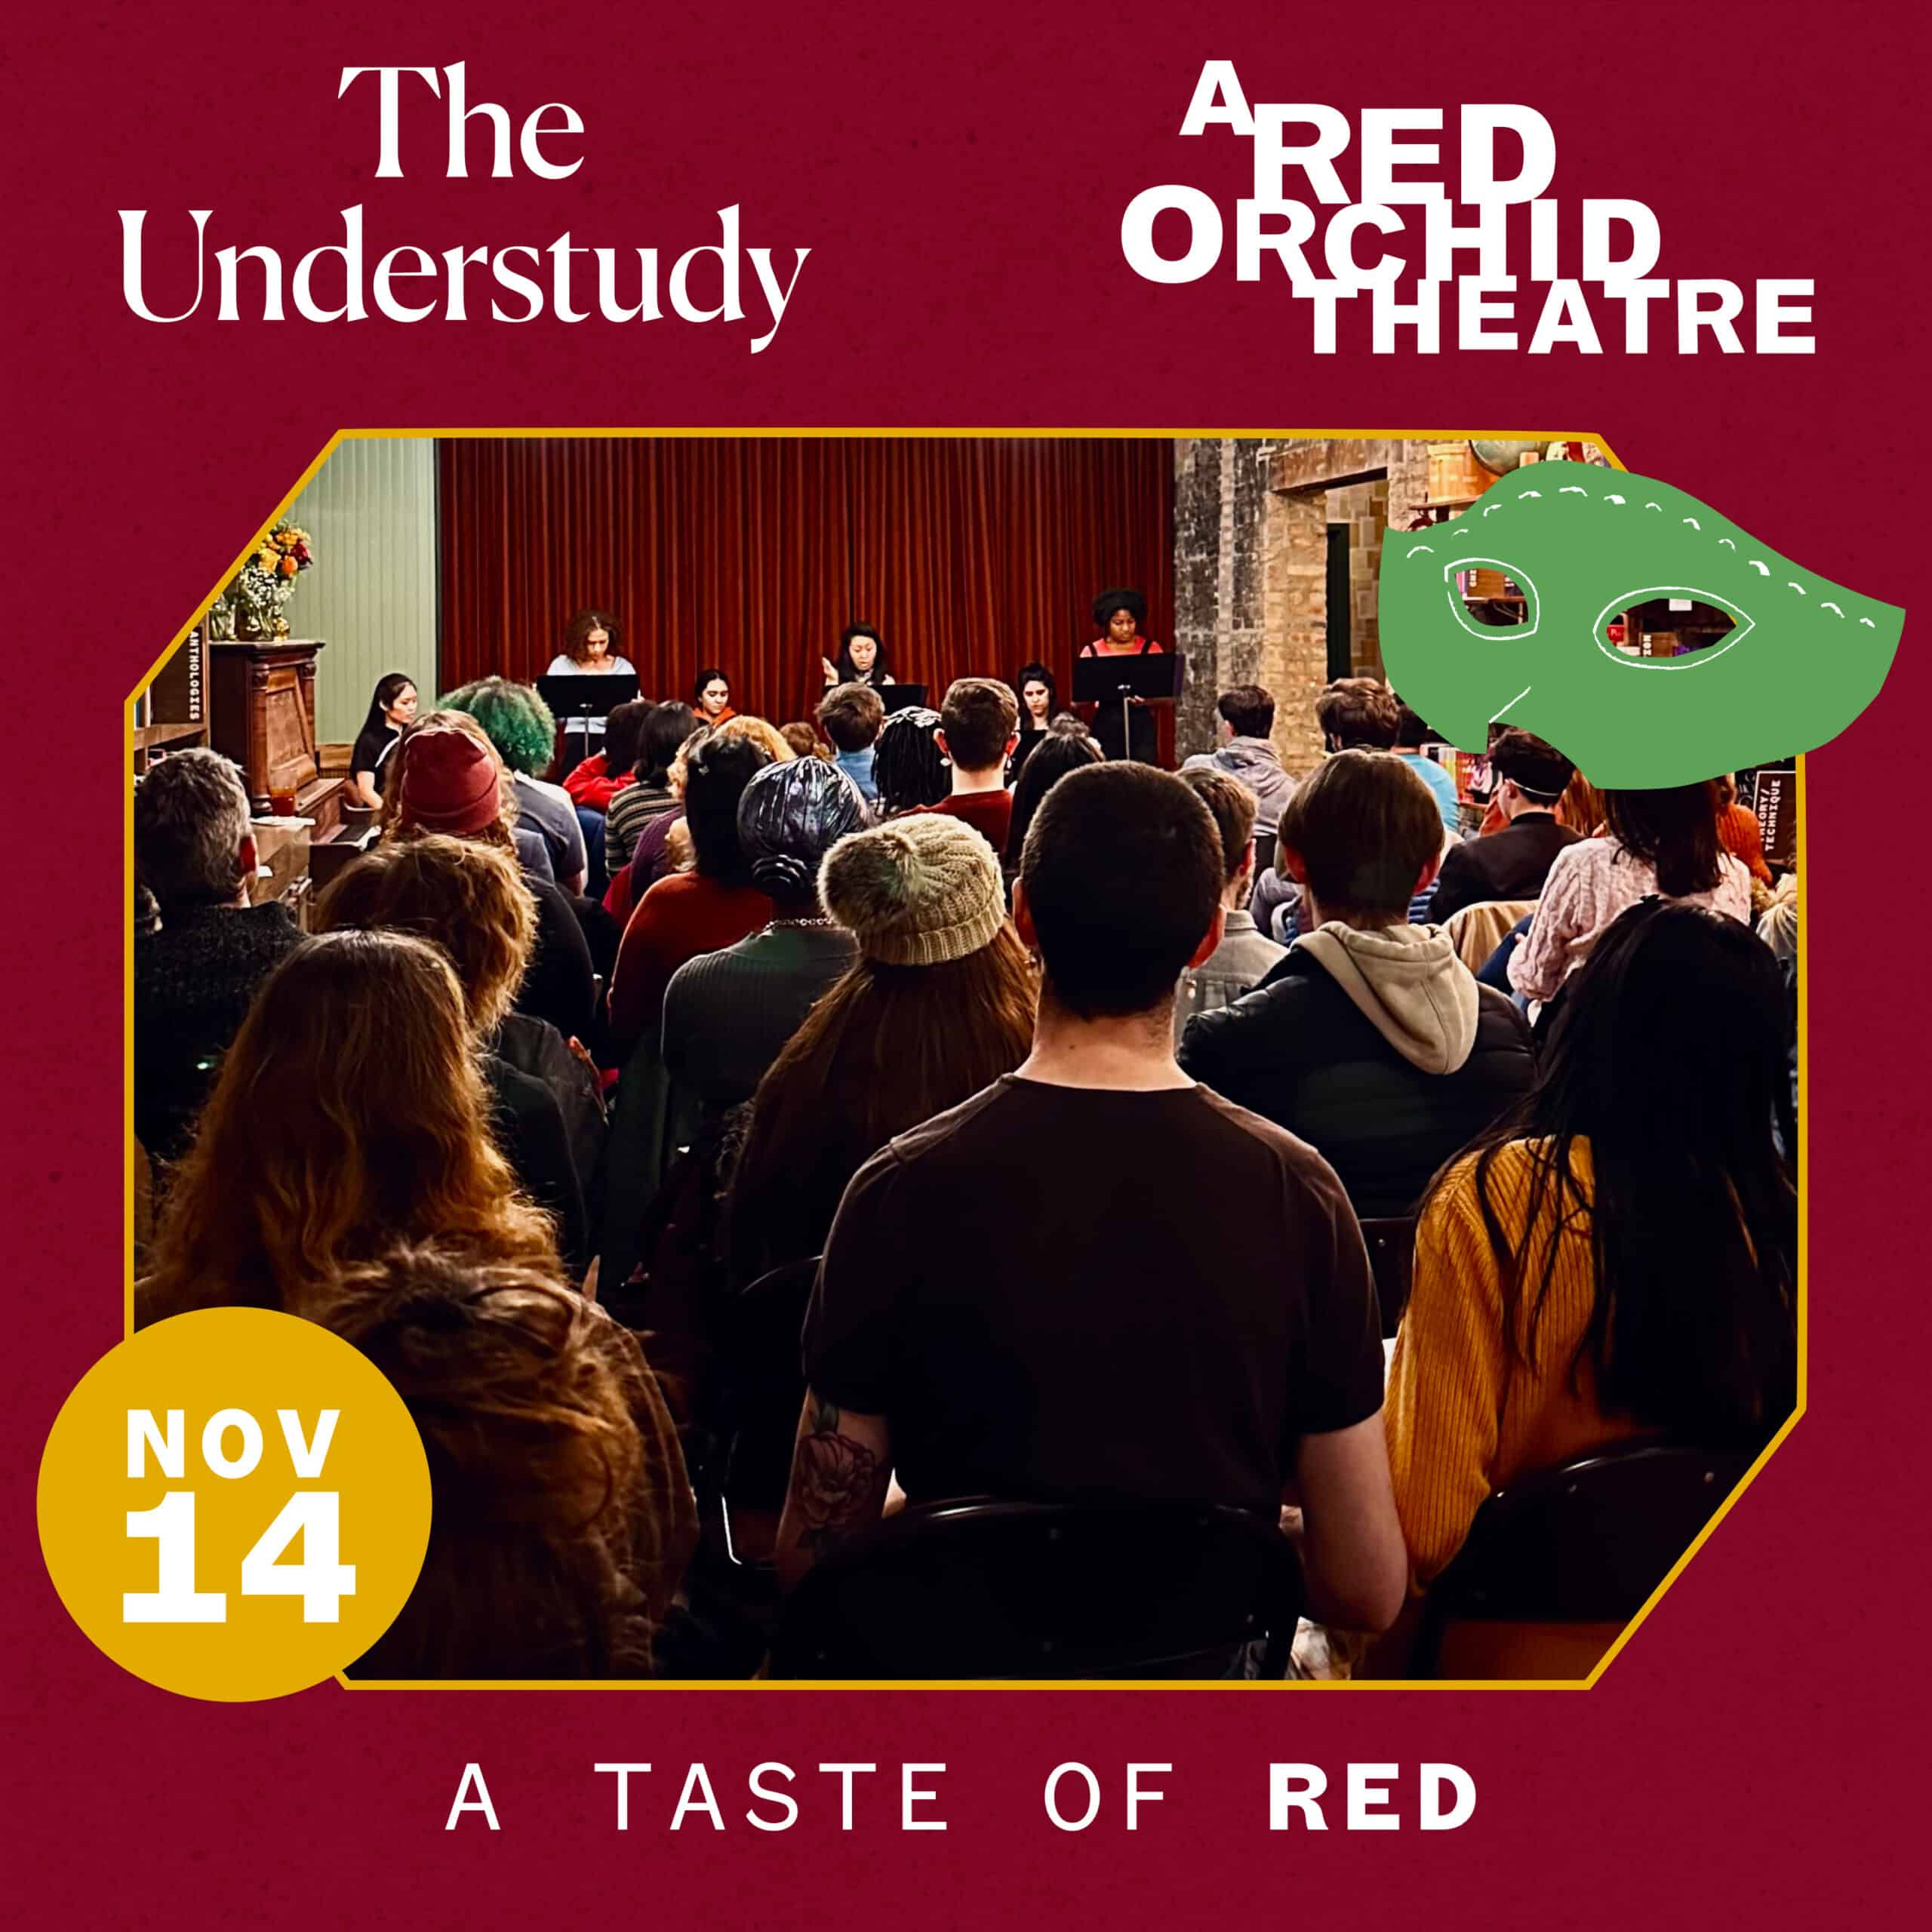 A Taste of RED with A Red Orchid Theatre